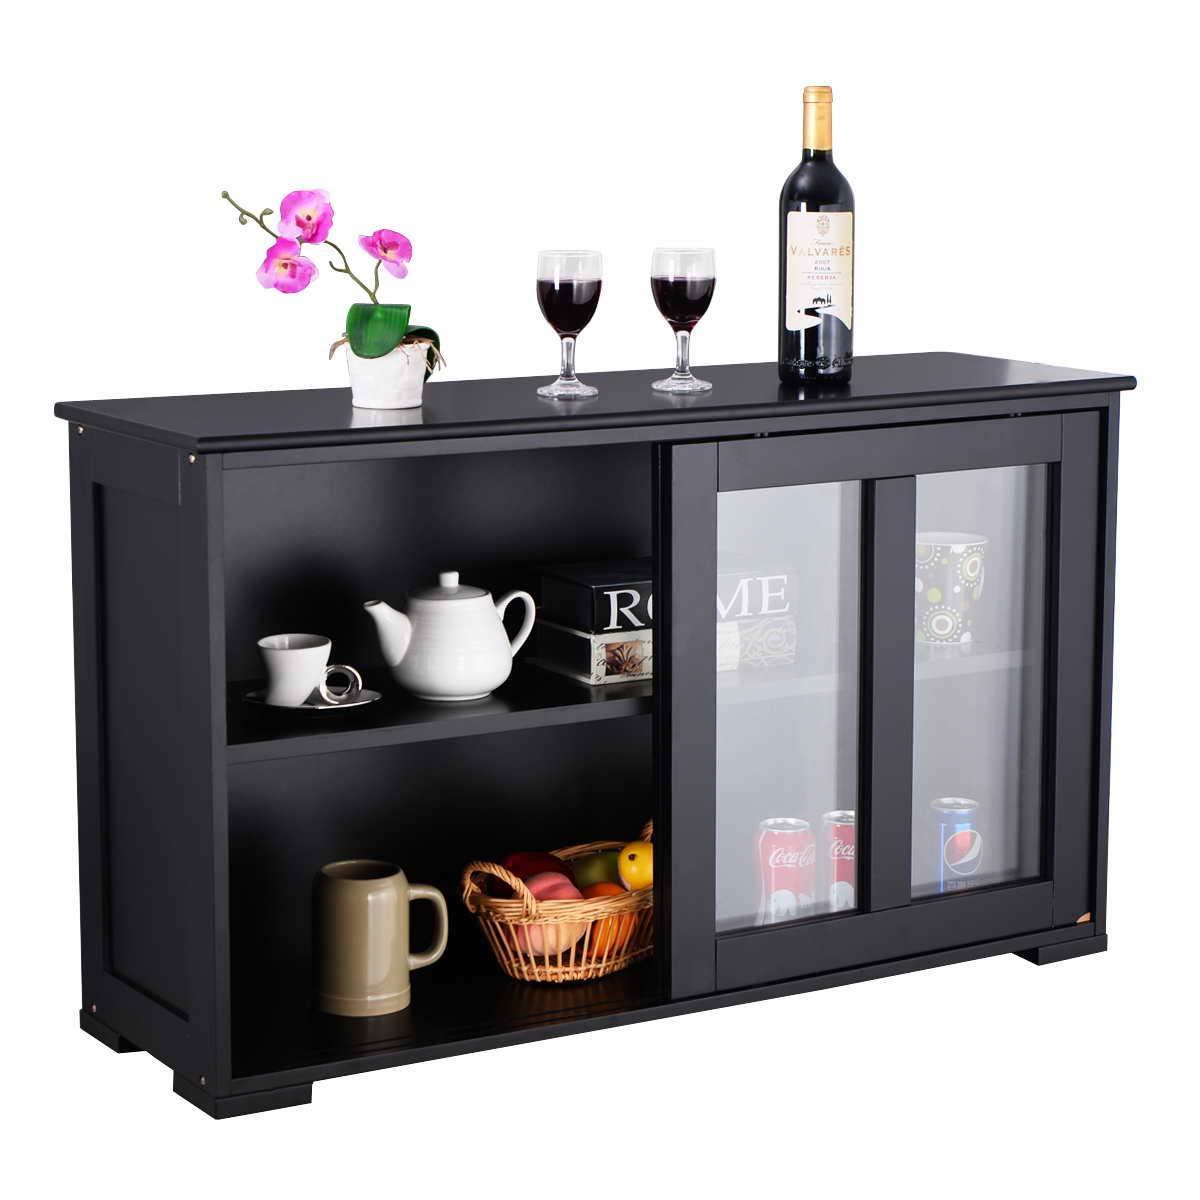 Top rated waterjoy kitchen storage sideboard stackable buffet storage cabinet with sliding door tempered glass panels for home kitchen antique black